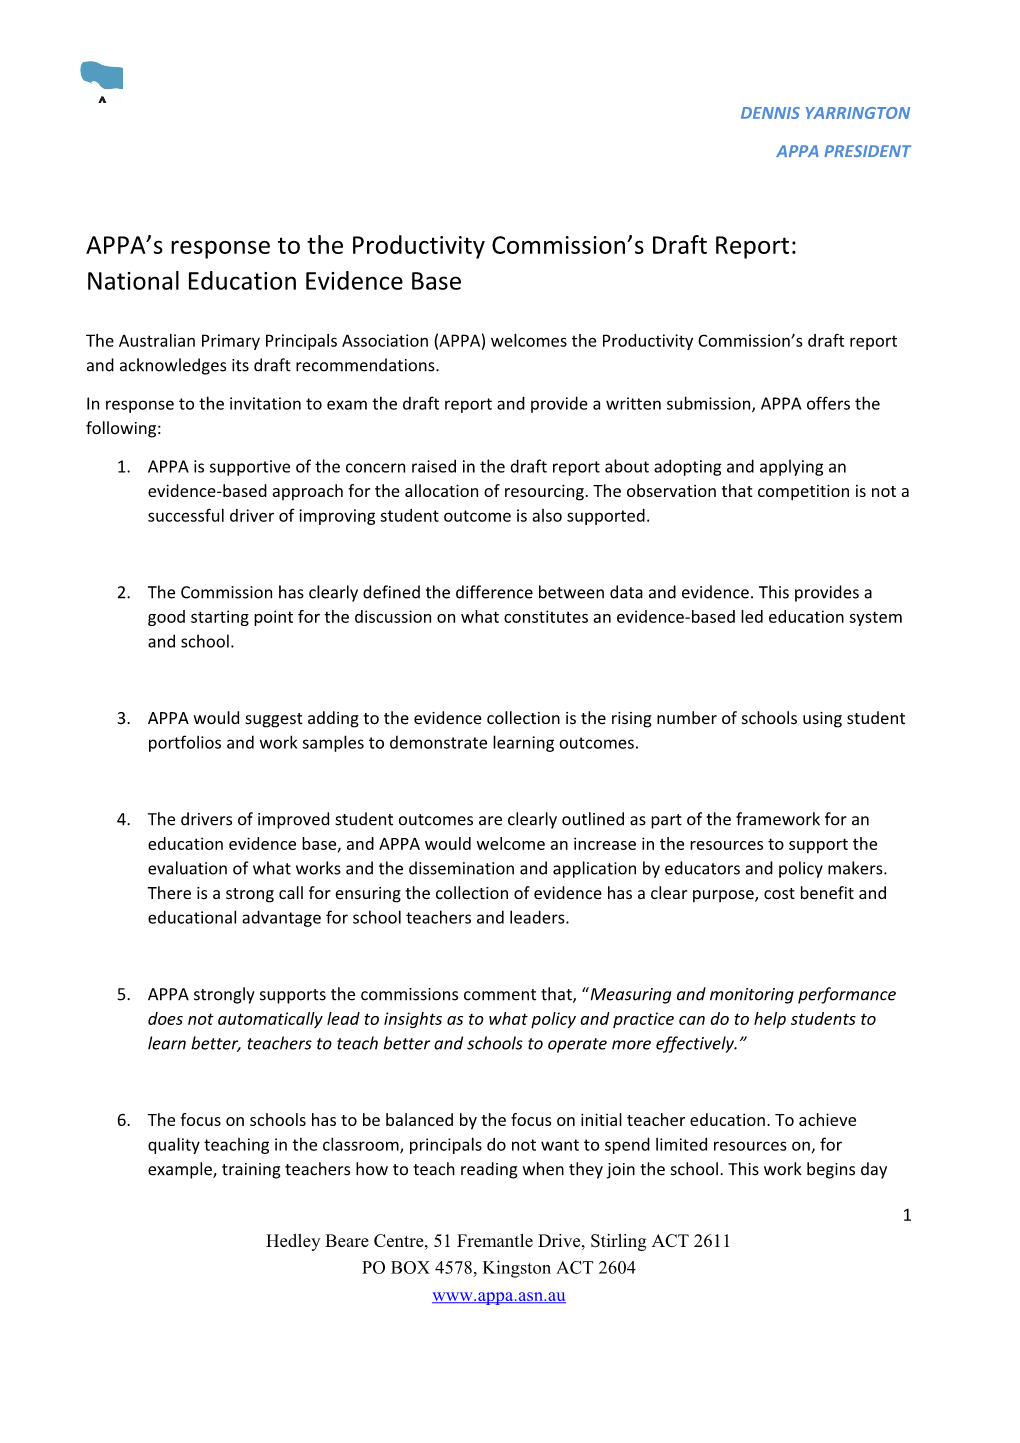 Submission DR89 - Australian Primary Principals Association (APPA) - Education Evidence